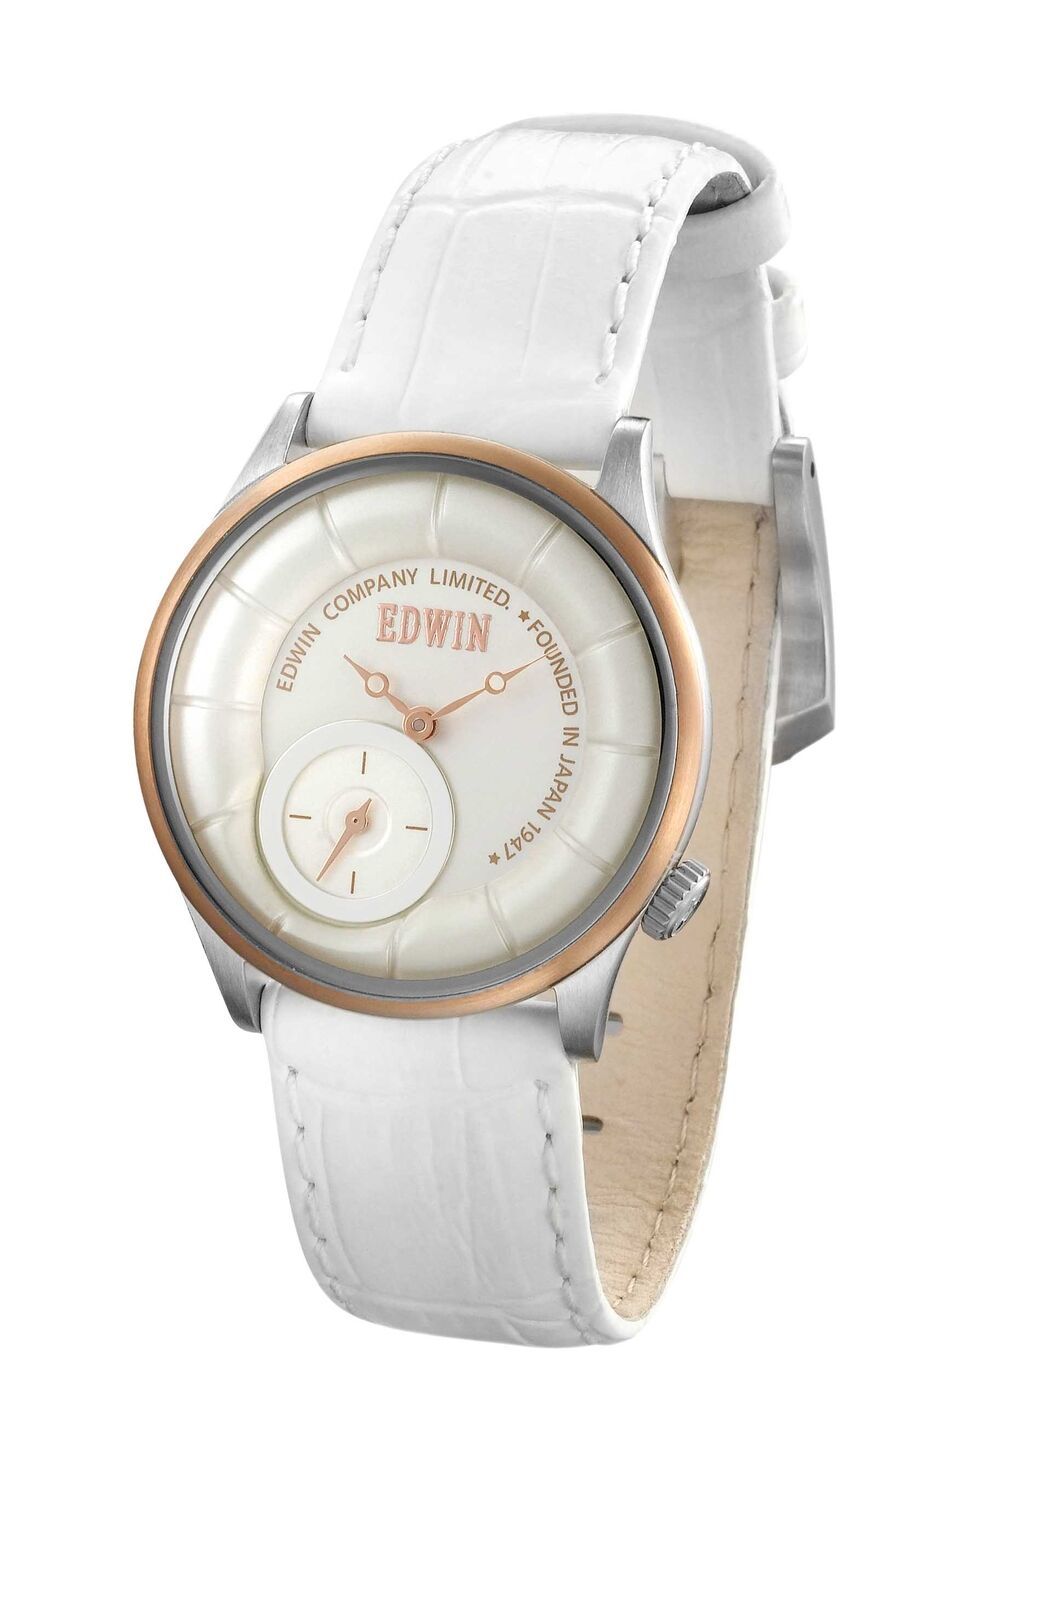 Edwin VINTAGED Women's 3 Hand Watch, Stainless Steel Case with Genuine Leather